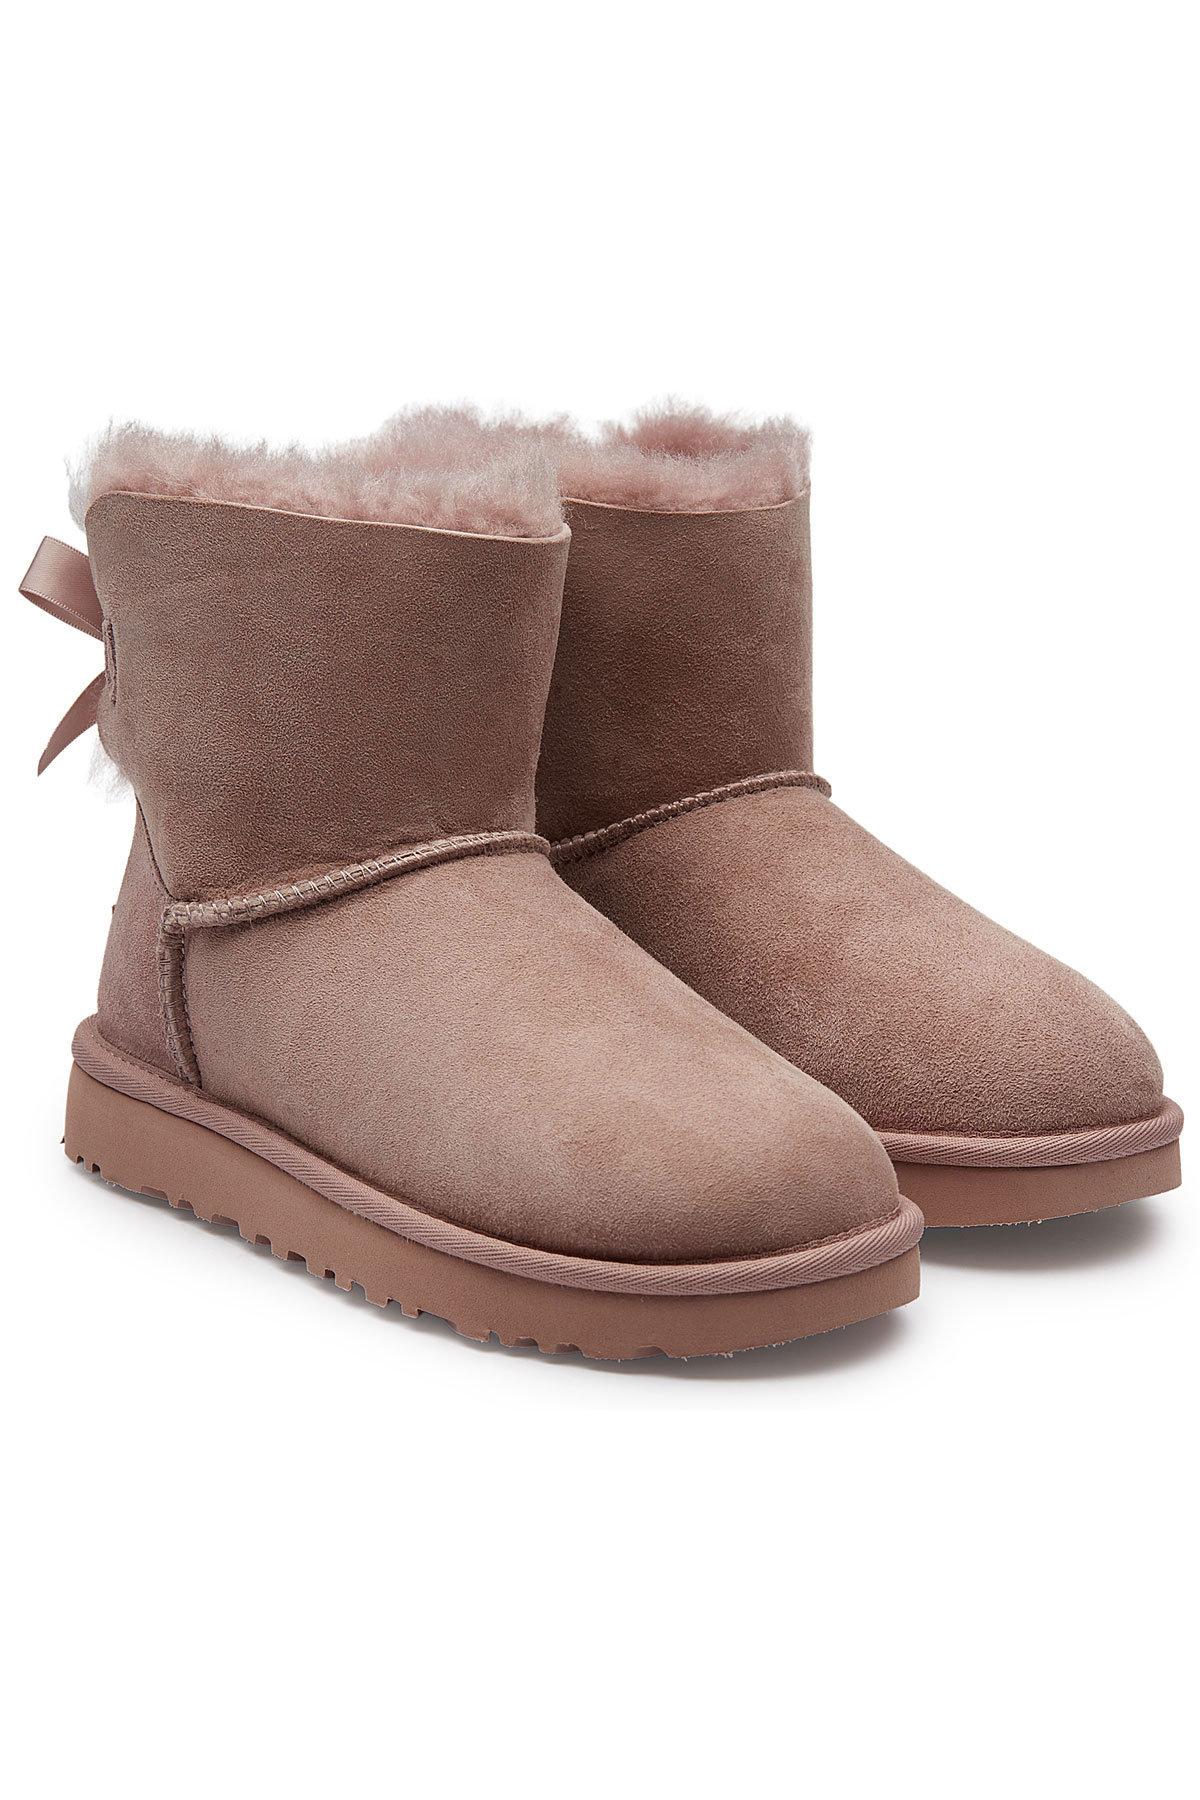 dusty pink uggs